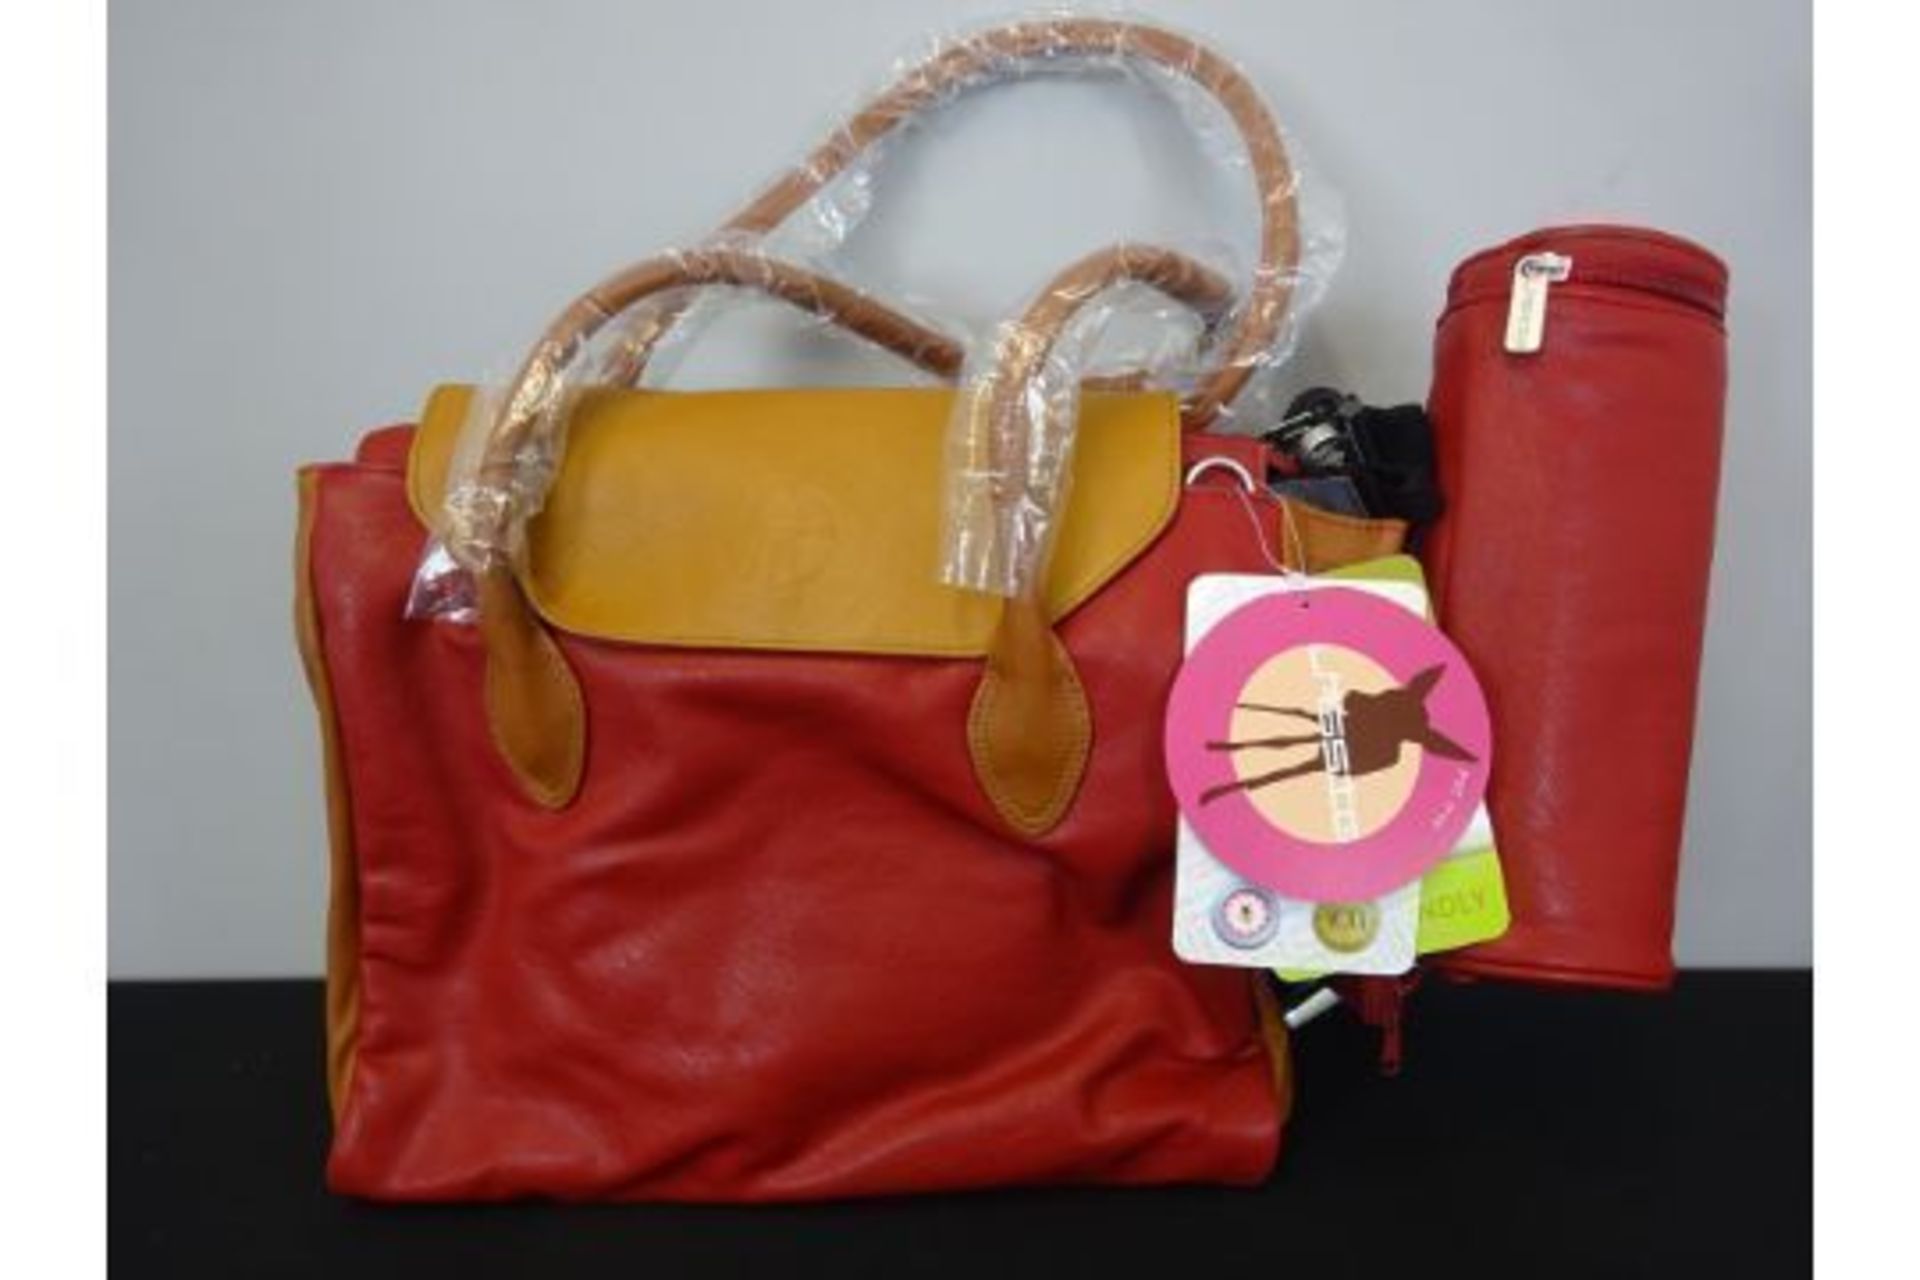 New Lassig Red & Brown Leather Changing Bag (similar bags RRP £59.99)